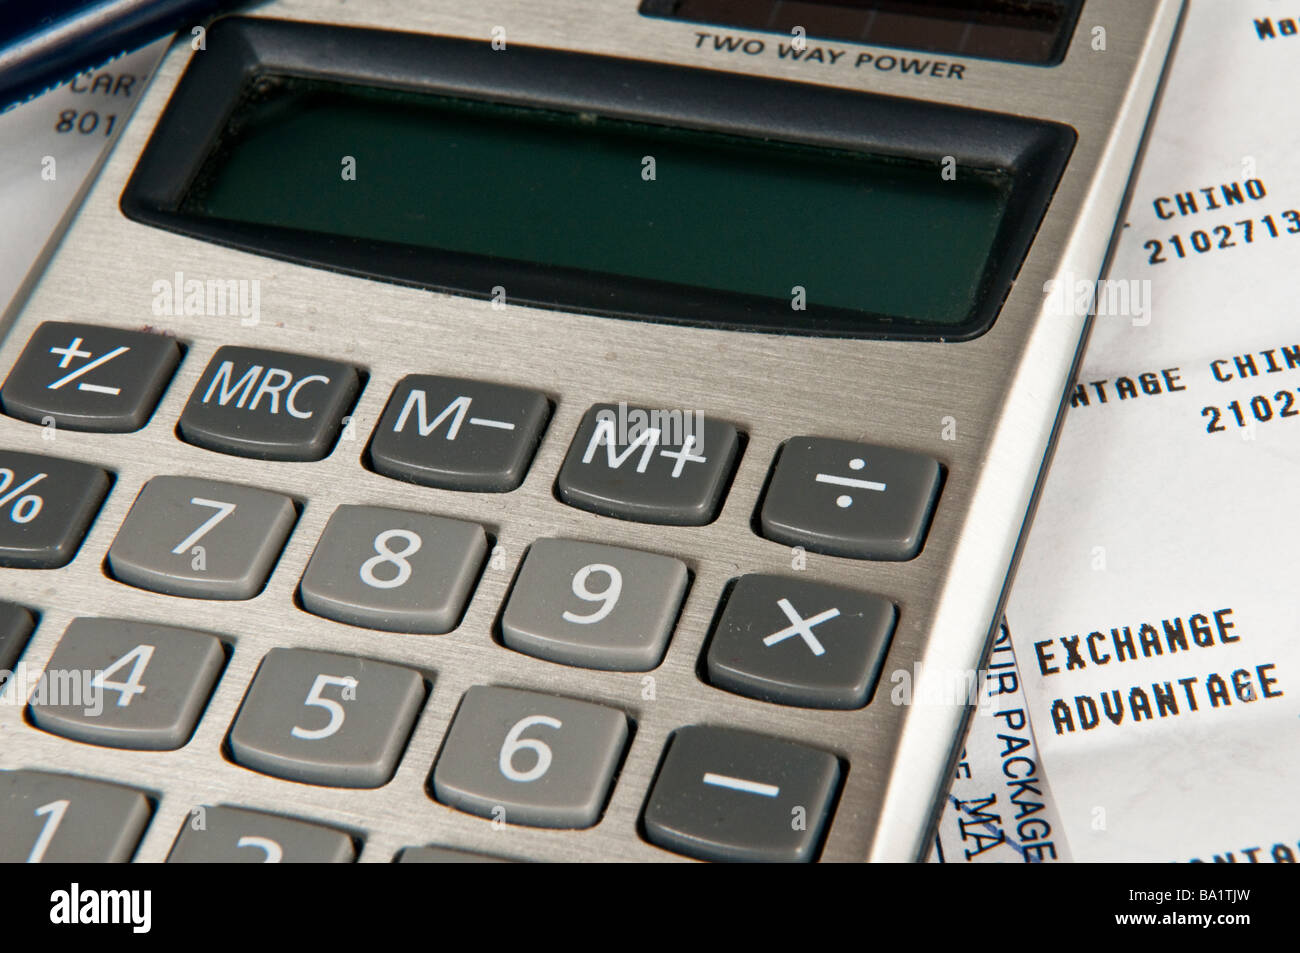 Calculator on top of receipts Stock Photo